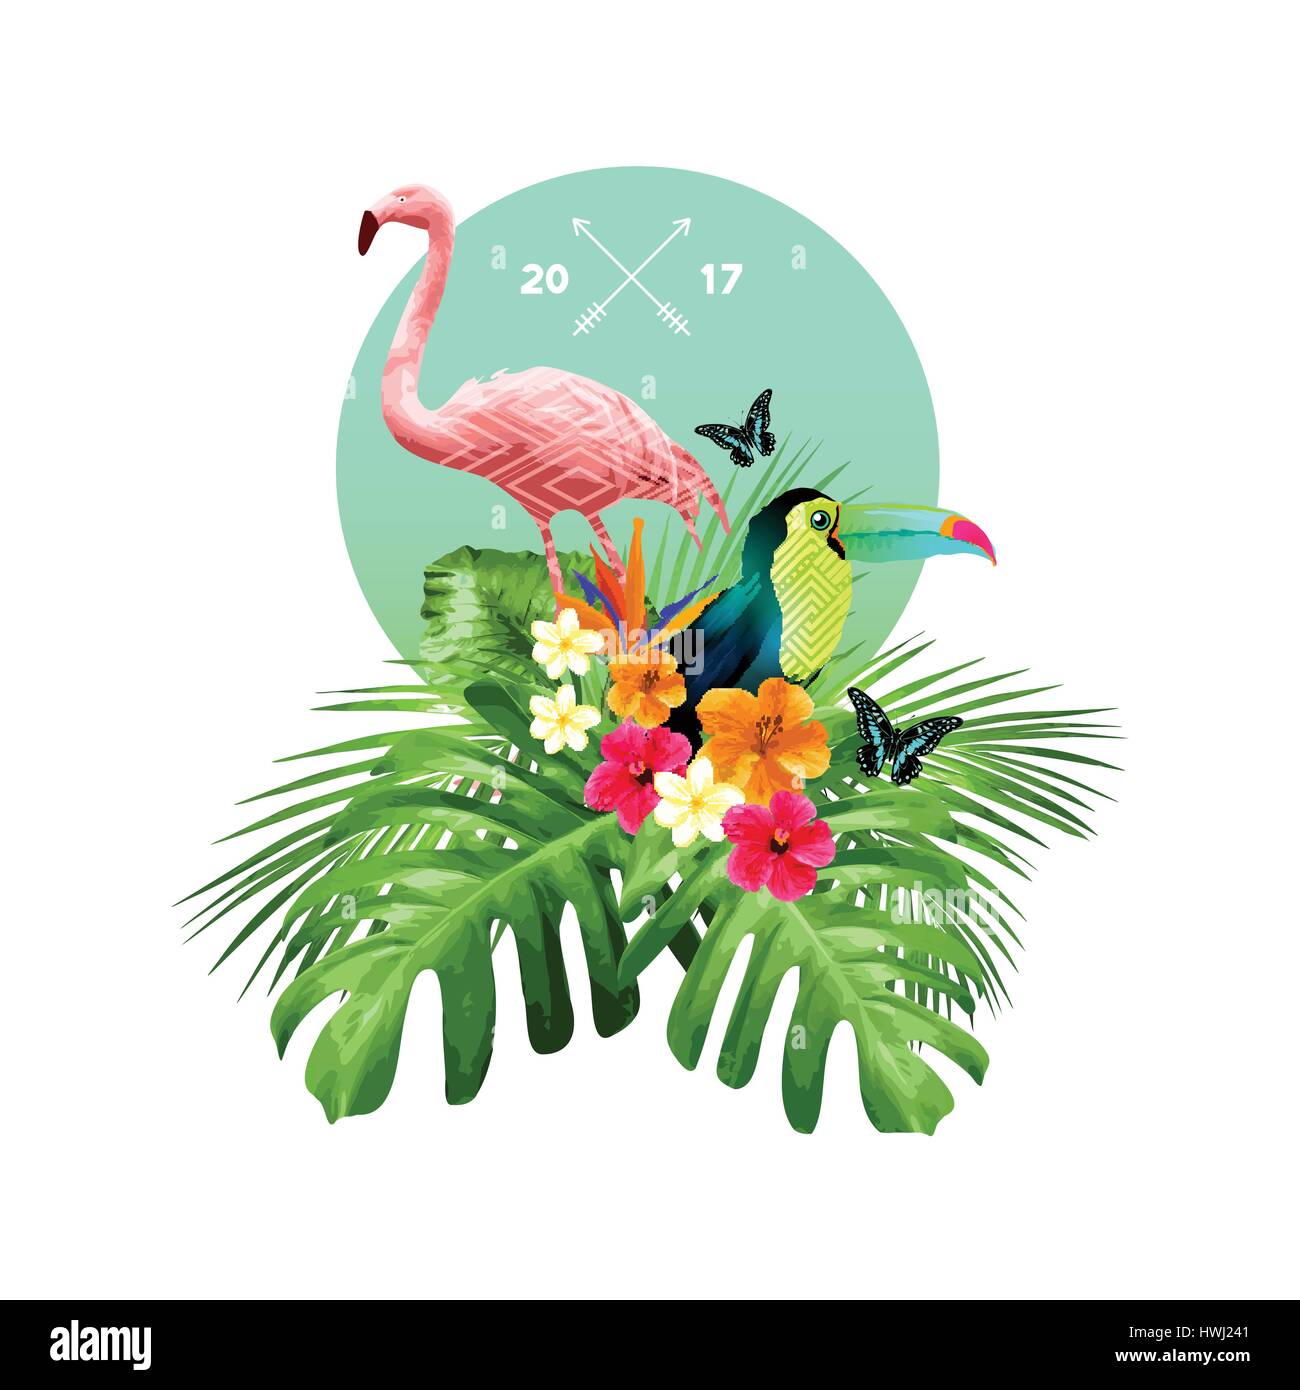 An attractive arrangement of tropical floral elements including palm leaves, birds and flowers. Vector illustration. Stock Vector